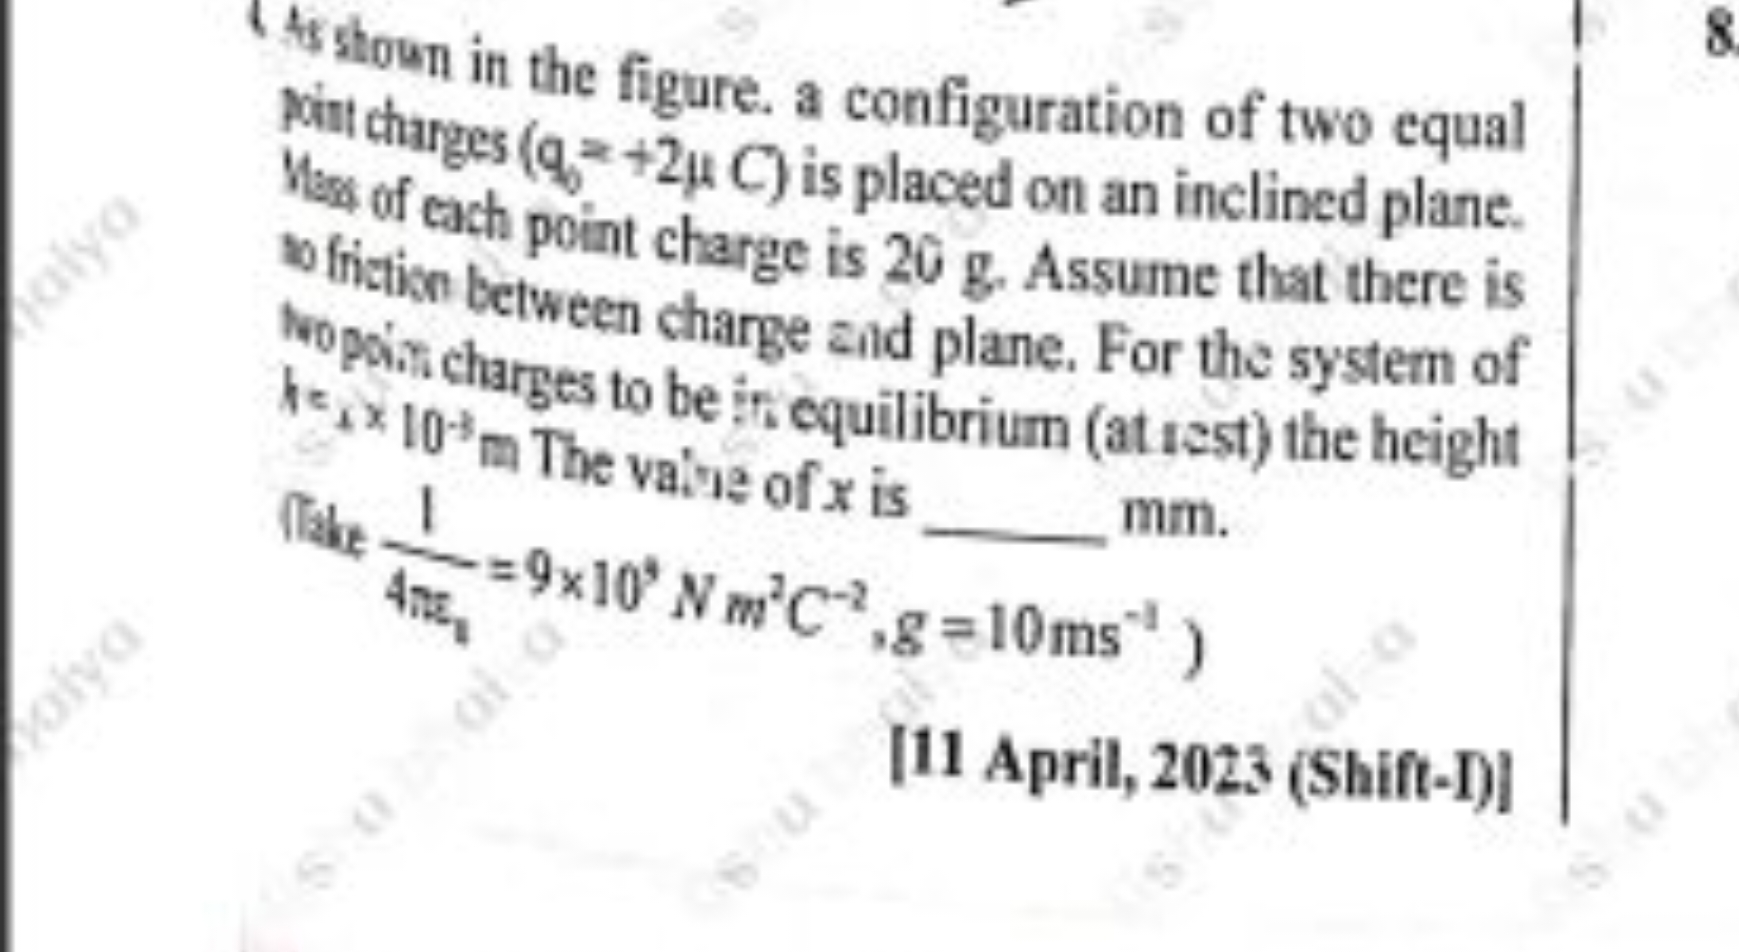 (to show in the figure. a configuration of two equal Point charges (q0